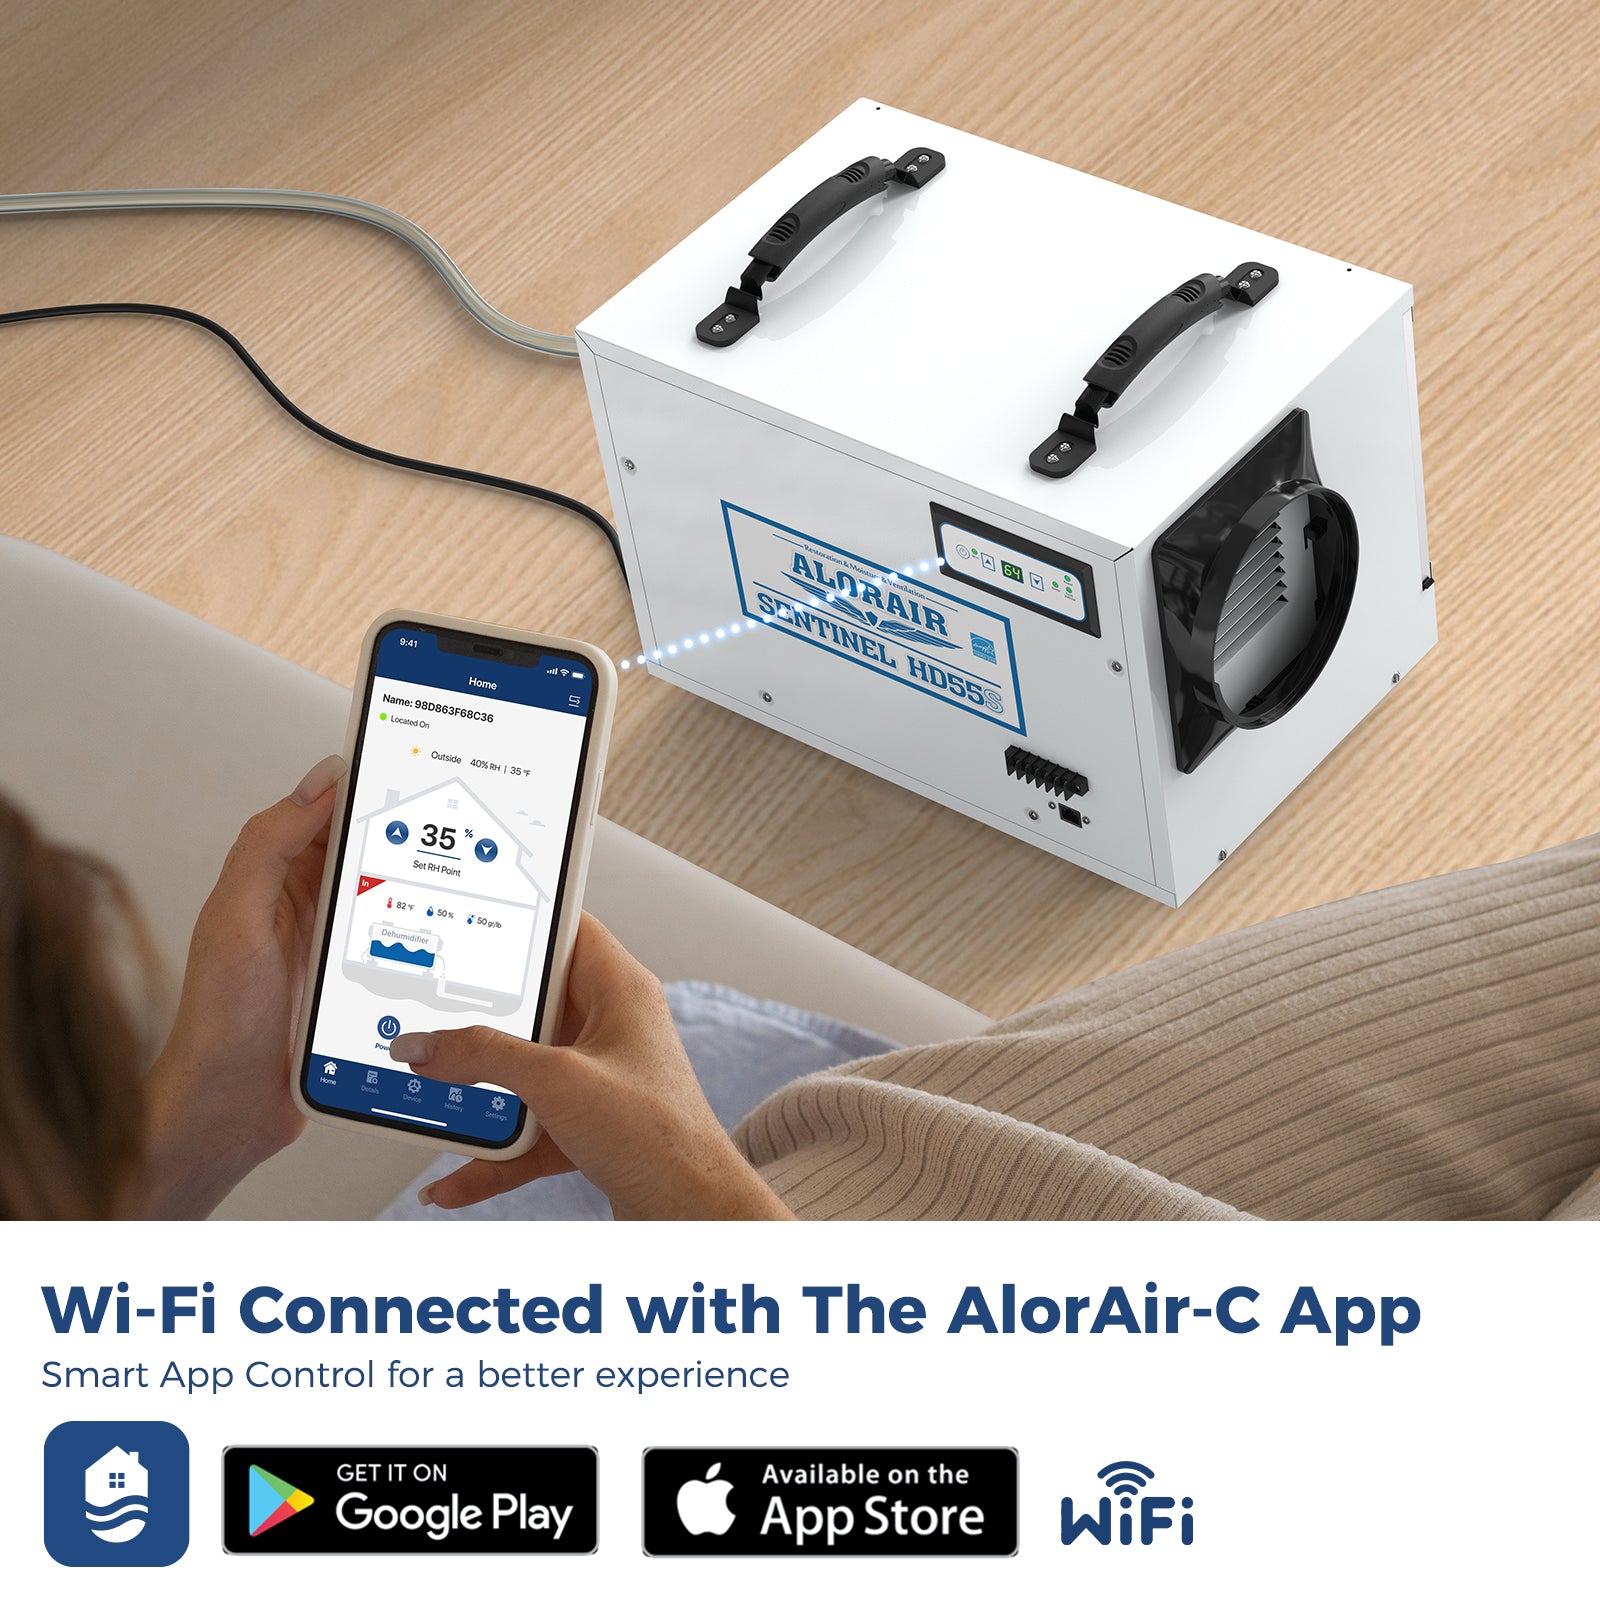 AlorAir® App Controlled Dehumidifier Removal 120PPD| Sentinel HD55S White WIFI | Size for 1300 sq.ft